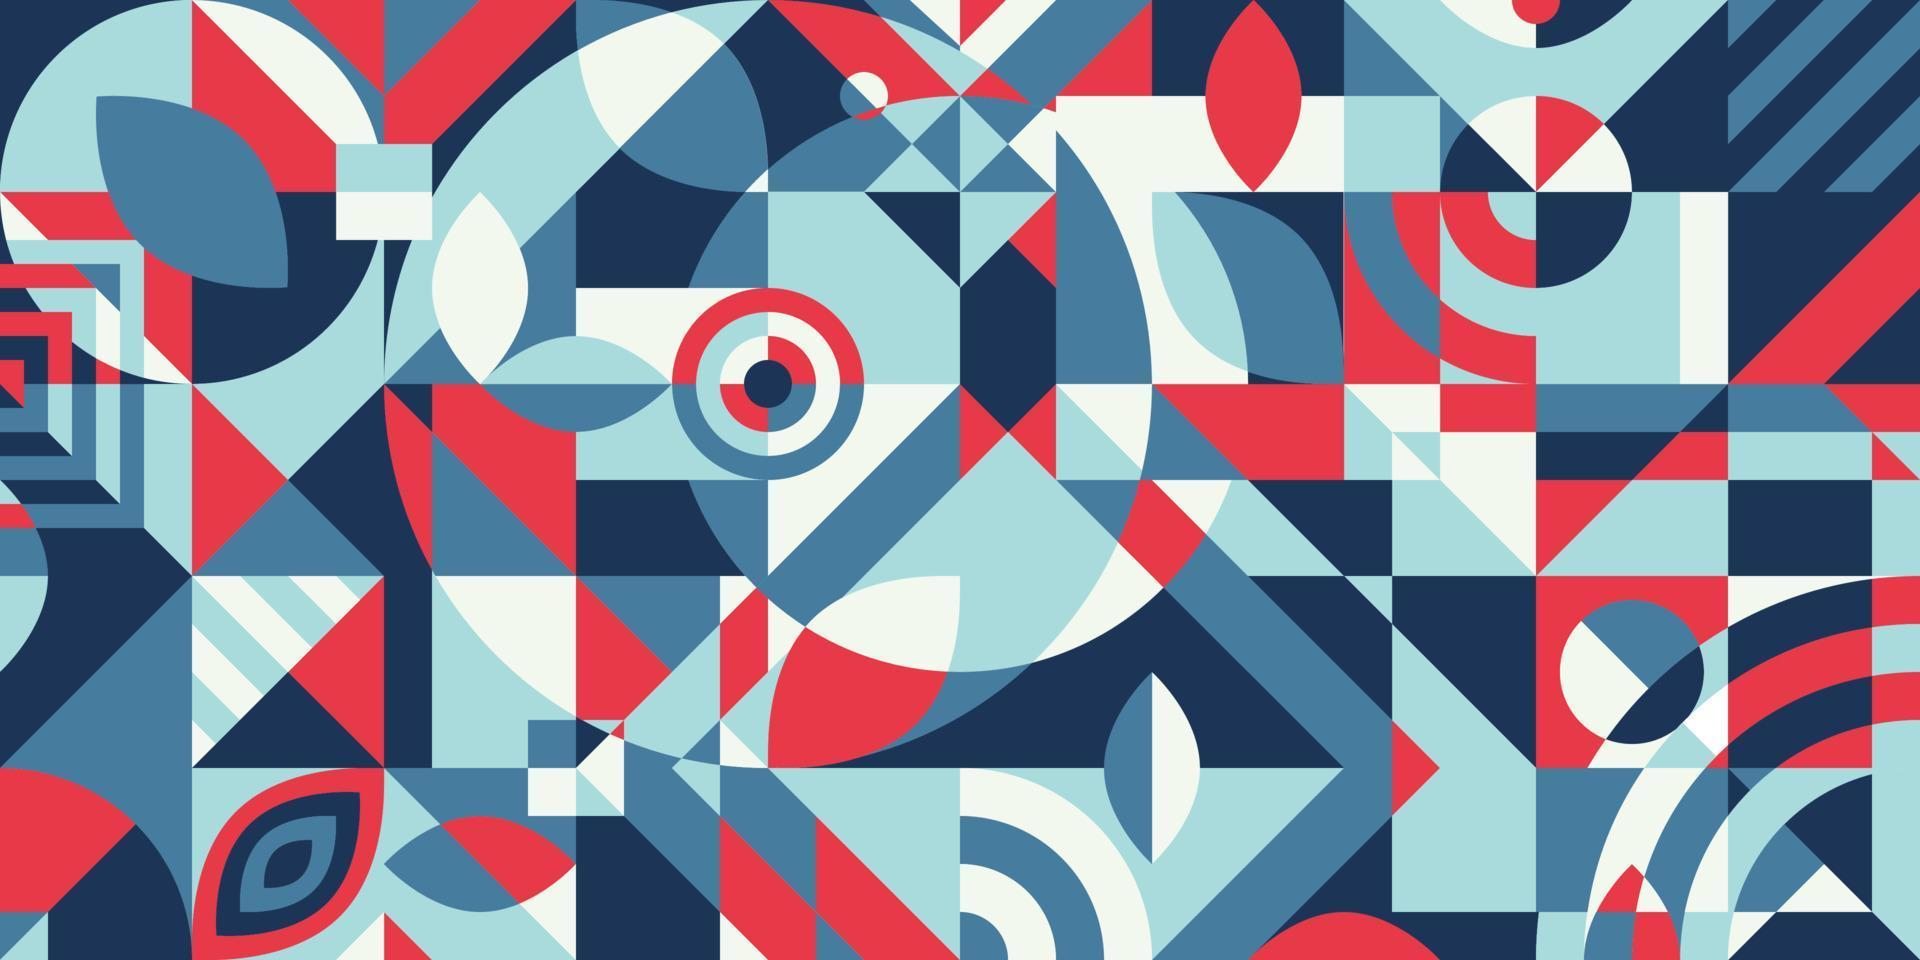 abstract mosaic geometric pattern design blue red and white color can be used for cover EPS10 vector